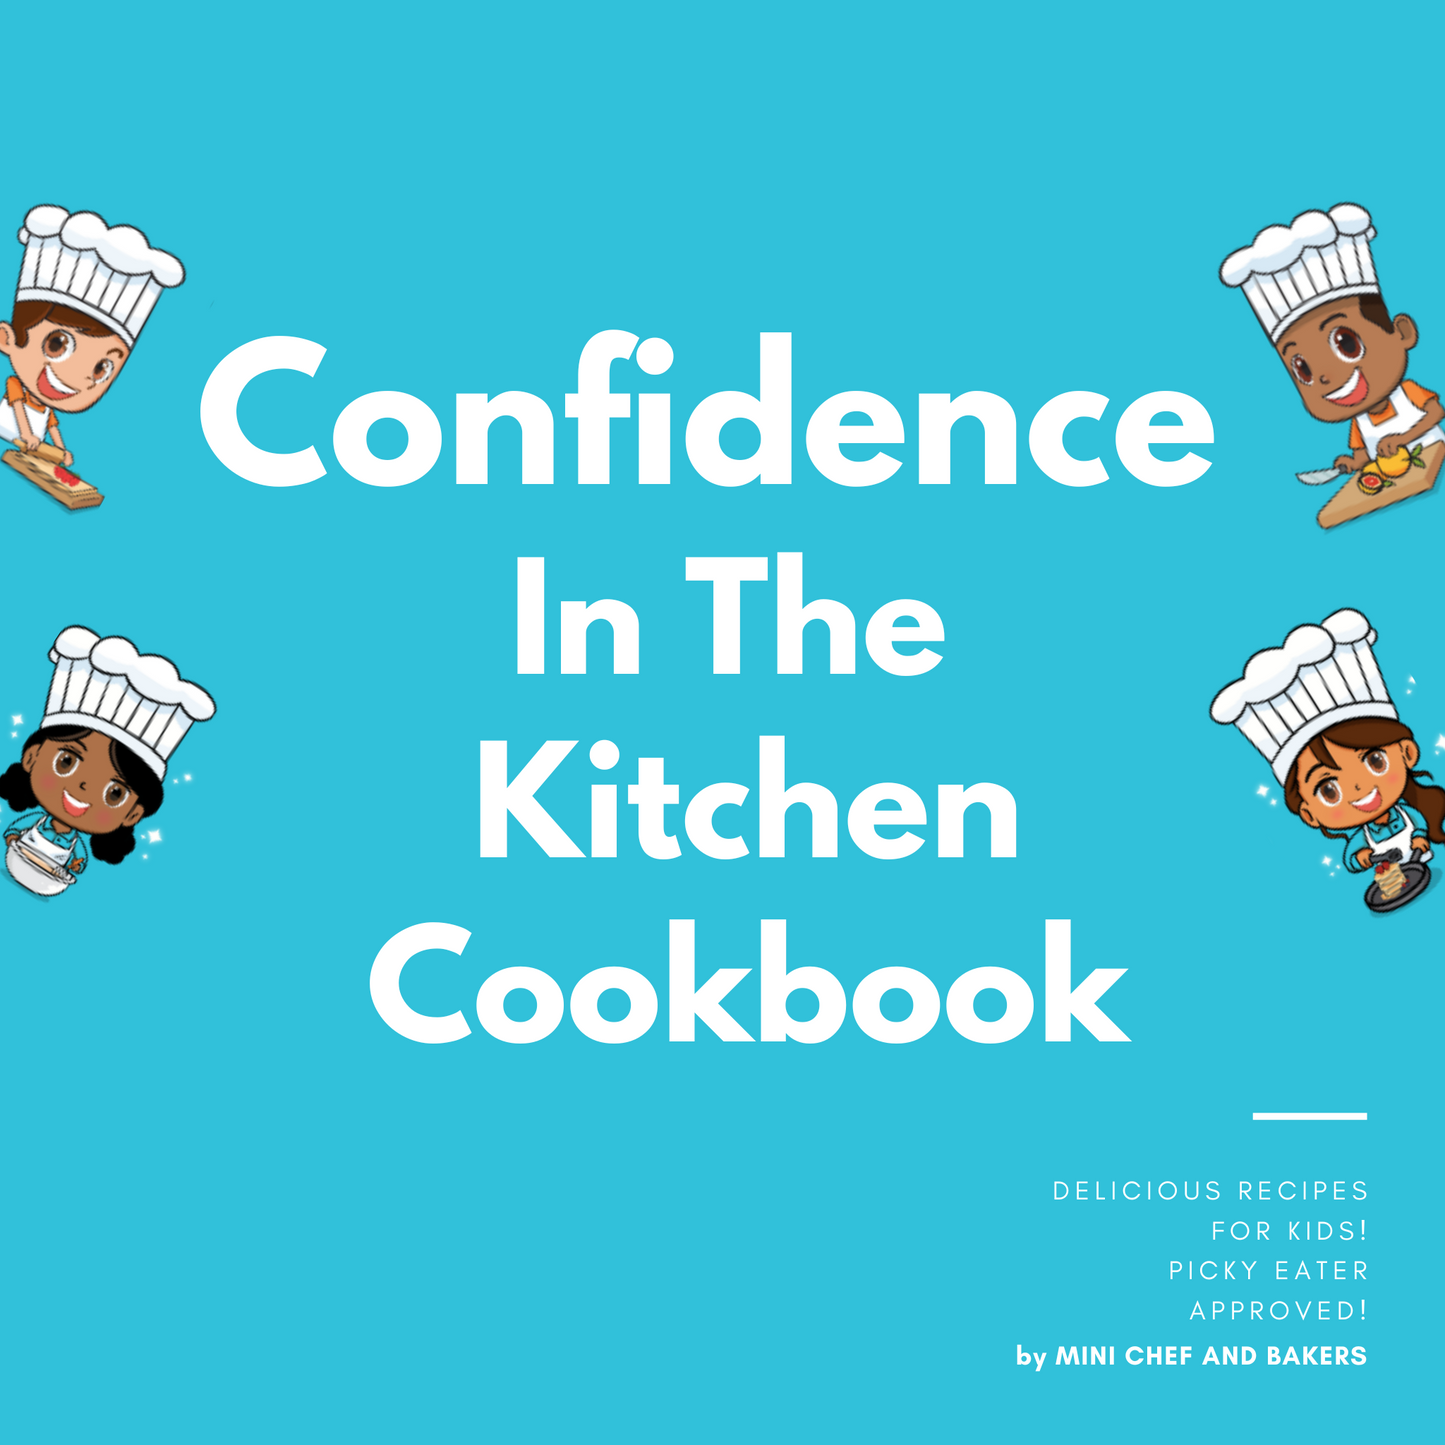 Confidence in the Kitchen Cookbook